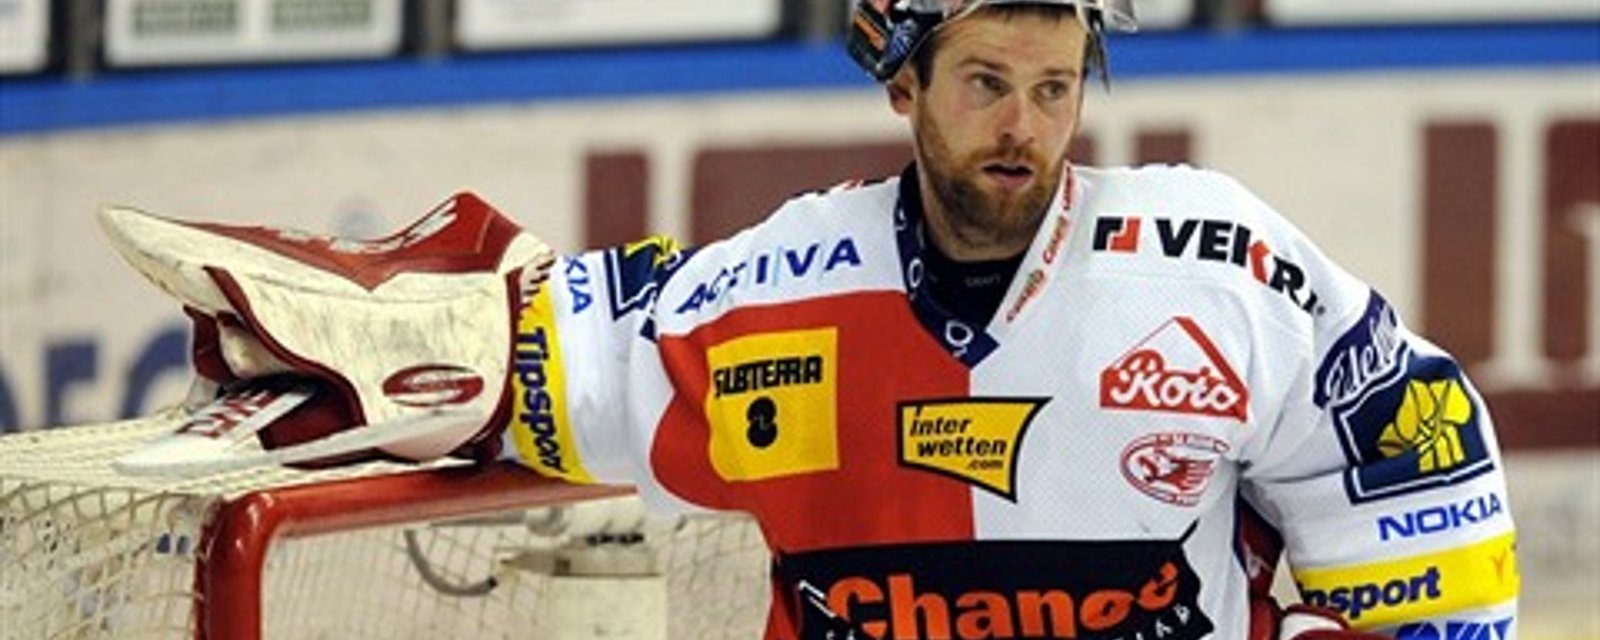 Gold medalist goalie commits suicide at just 41 years old